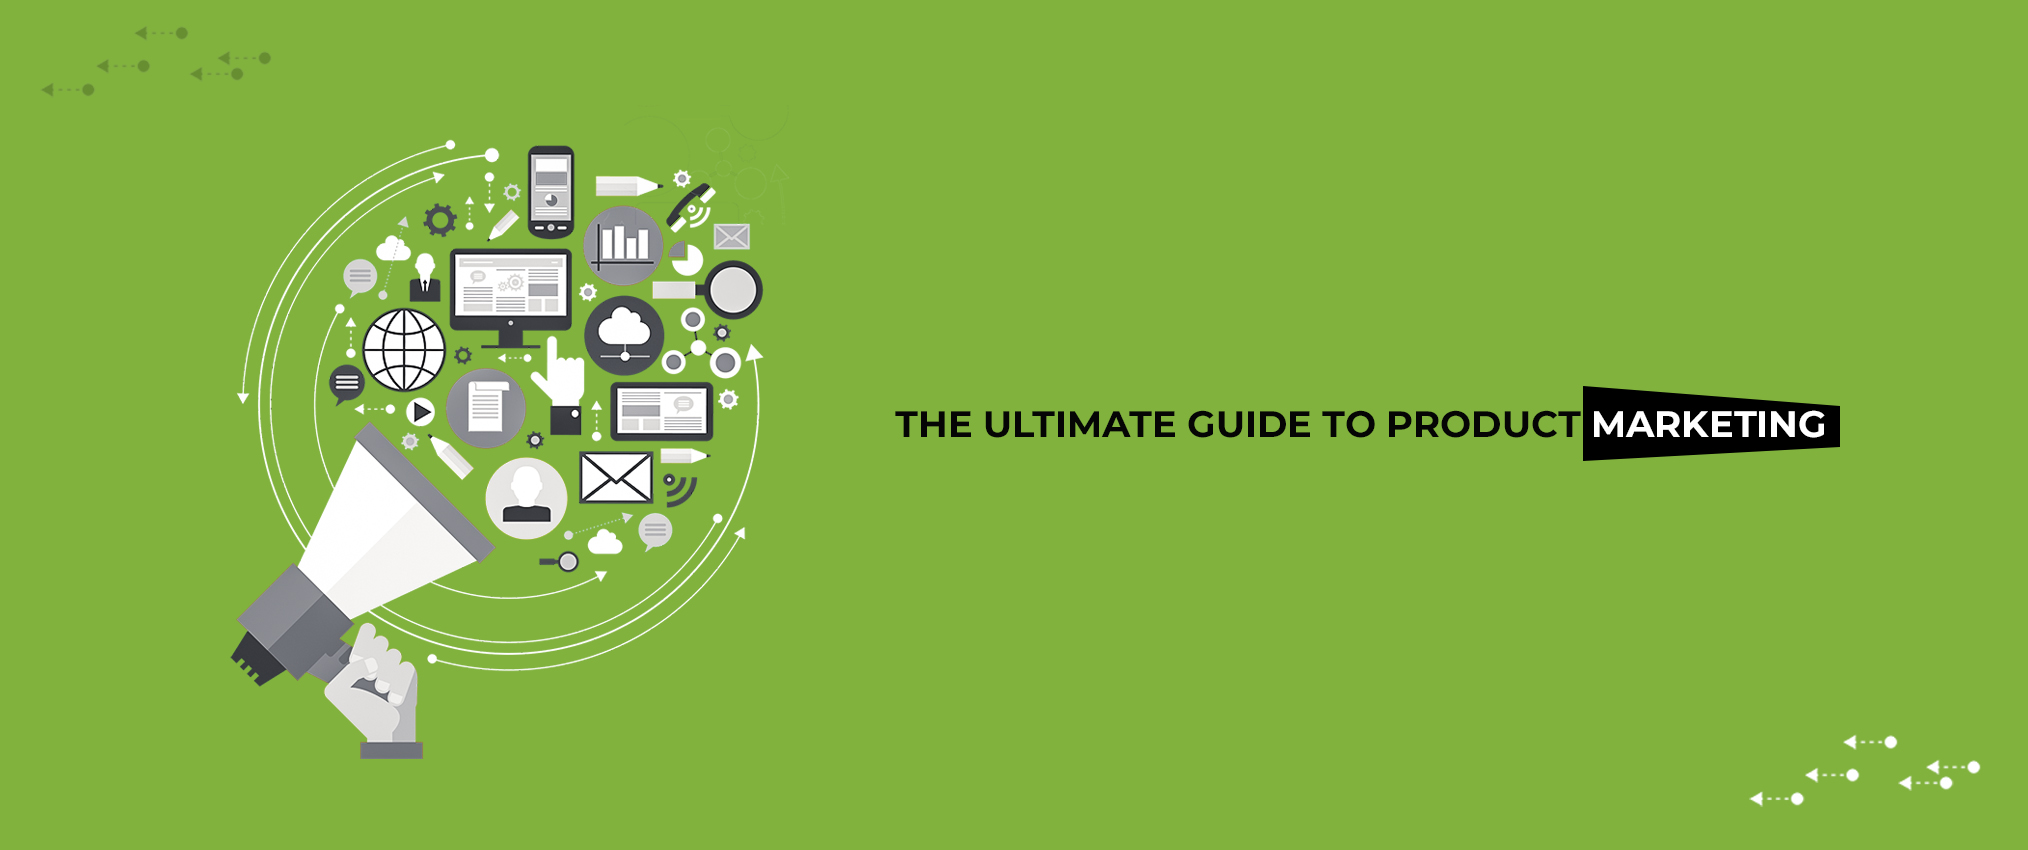 The-Ultimate-Guide-to-Product-Marketing